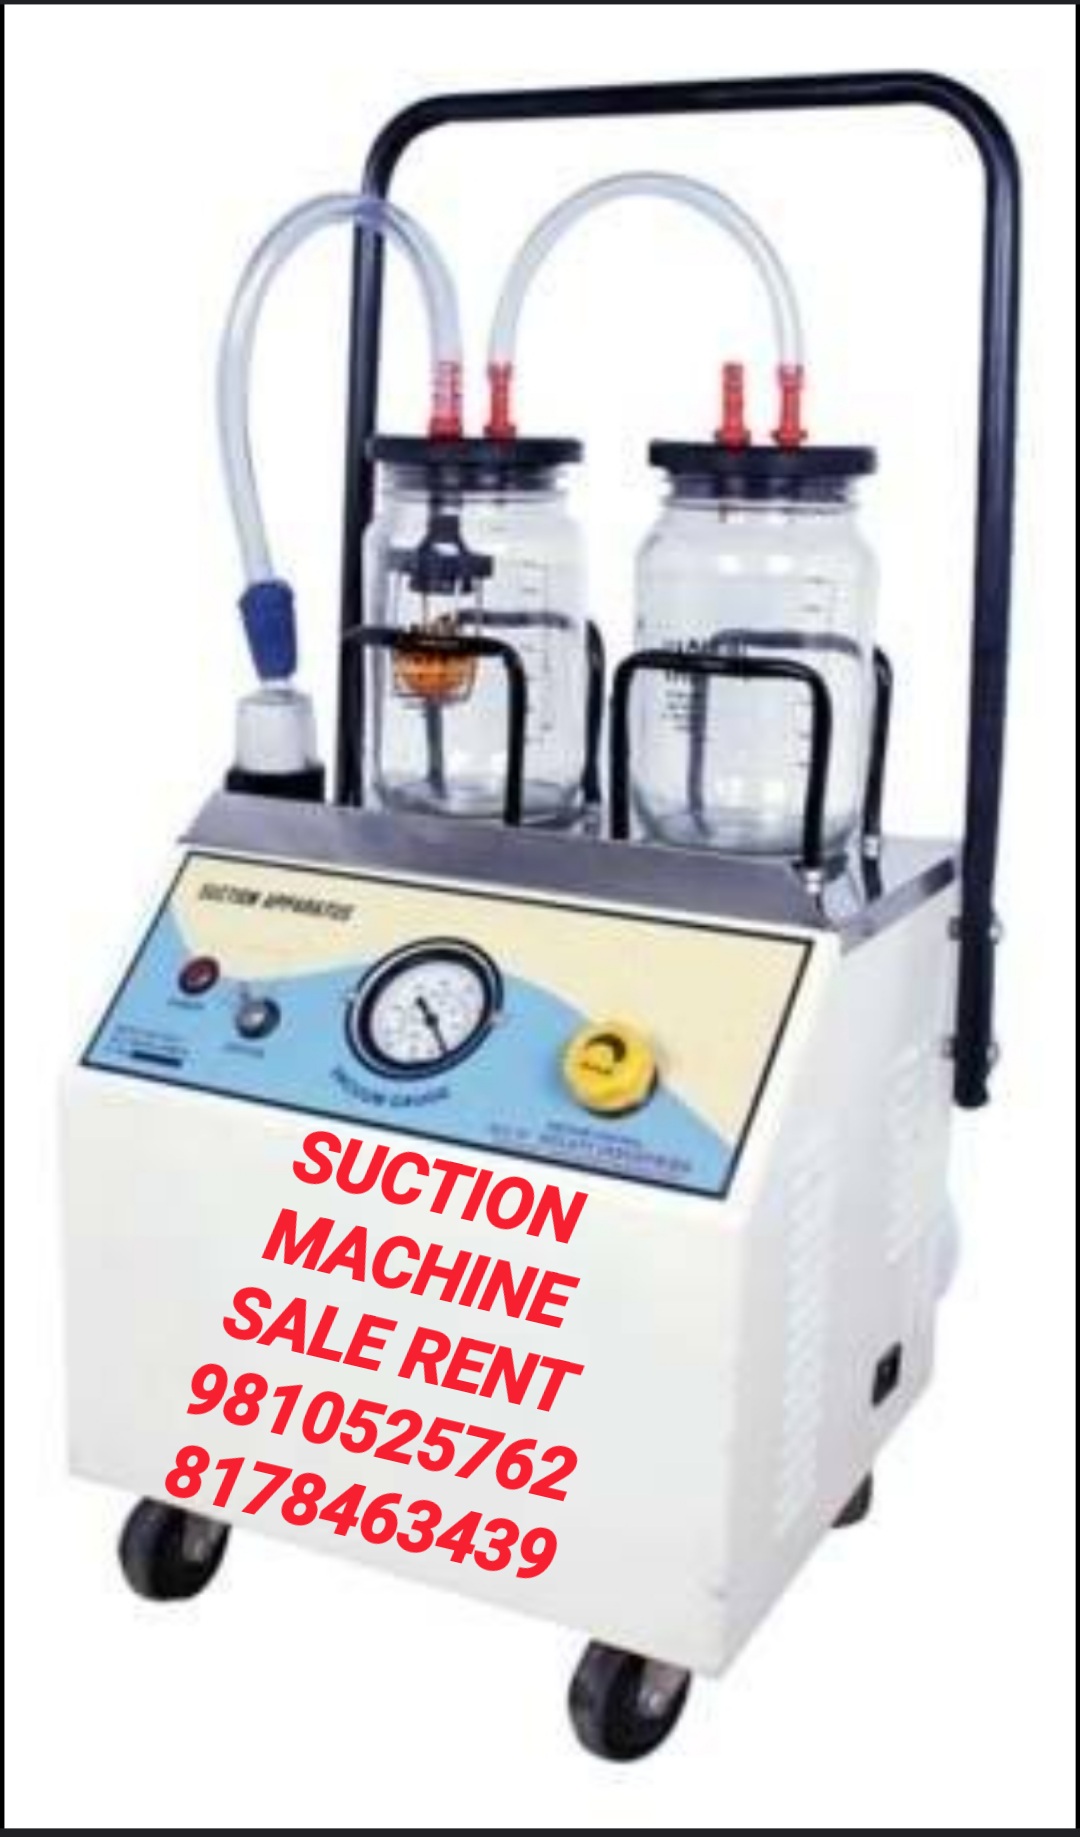 SUCTION MACHINE FOR RENT OR SALE 9810525762